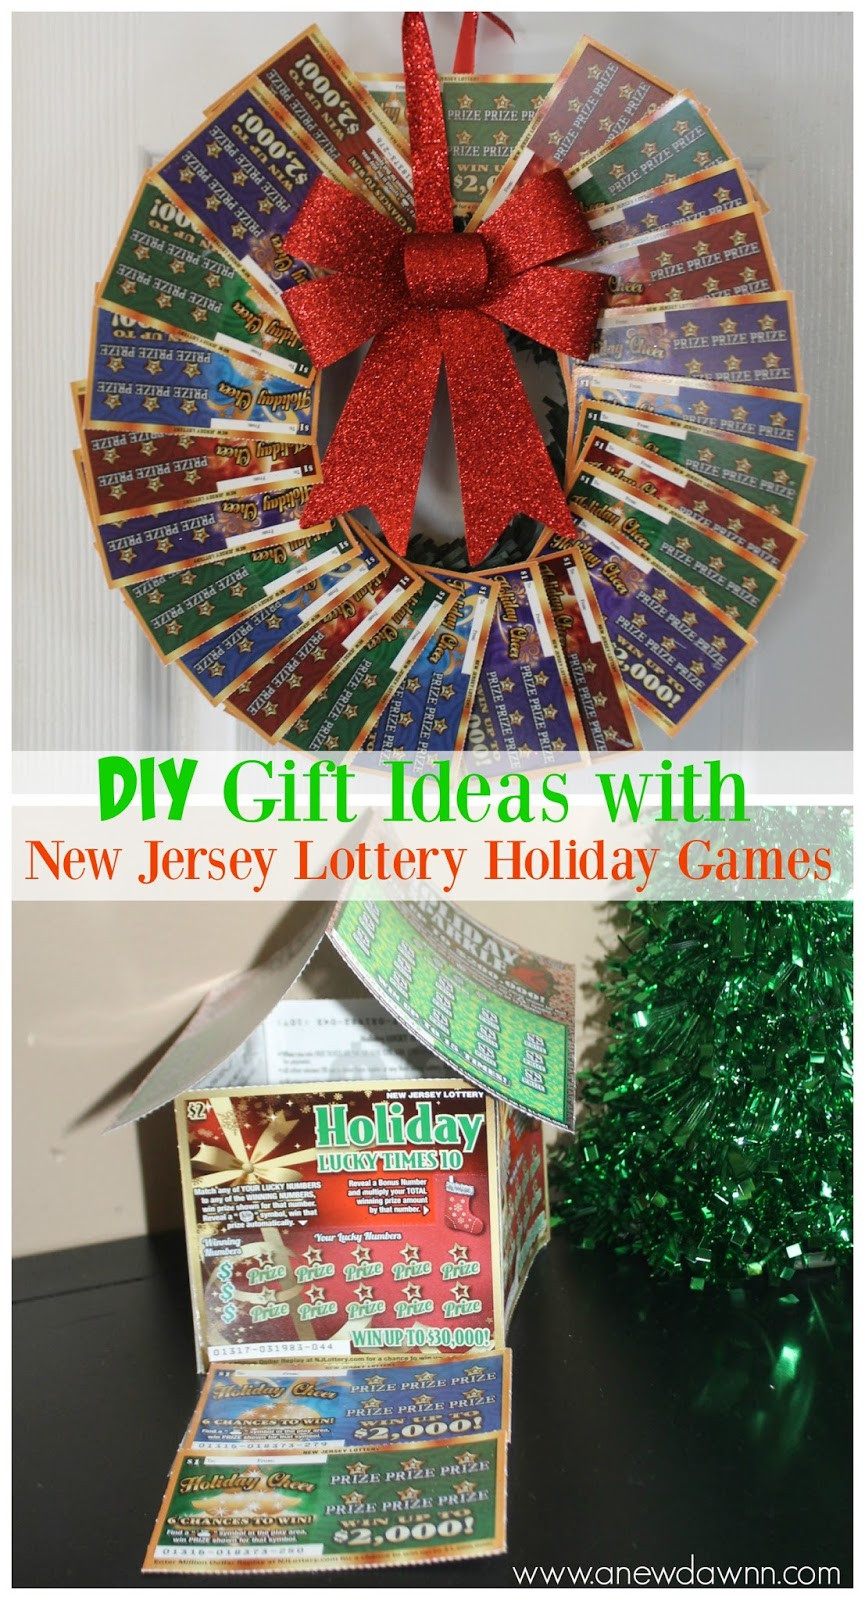 Lottery Ticket Christmas Gift Ideas
 New Jersey Lottery Holiday Games DIY Gift Ideas A New Dawnn